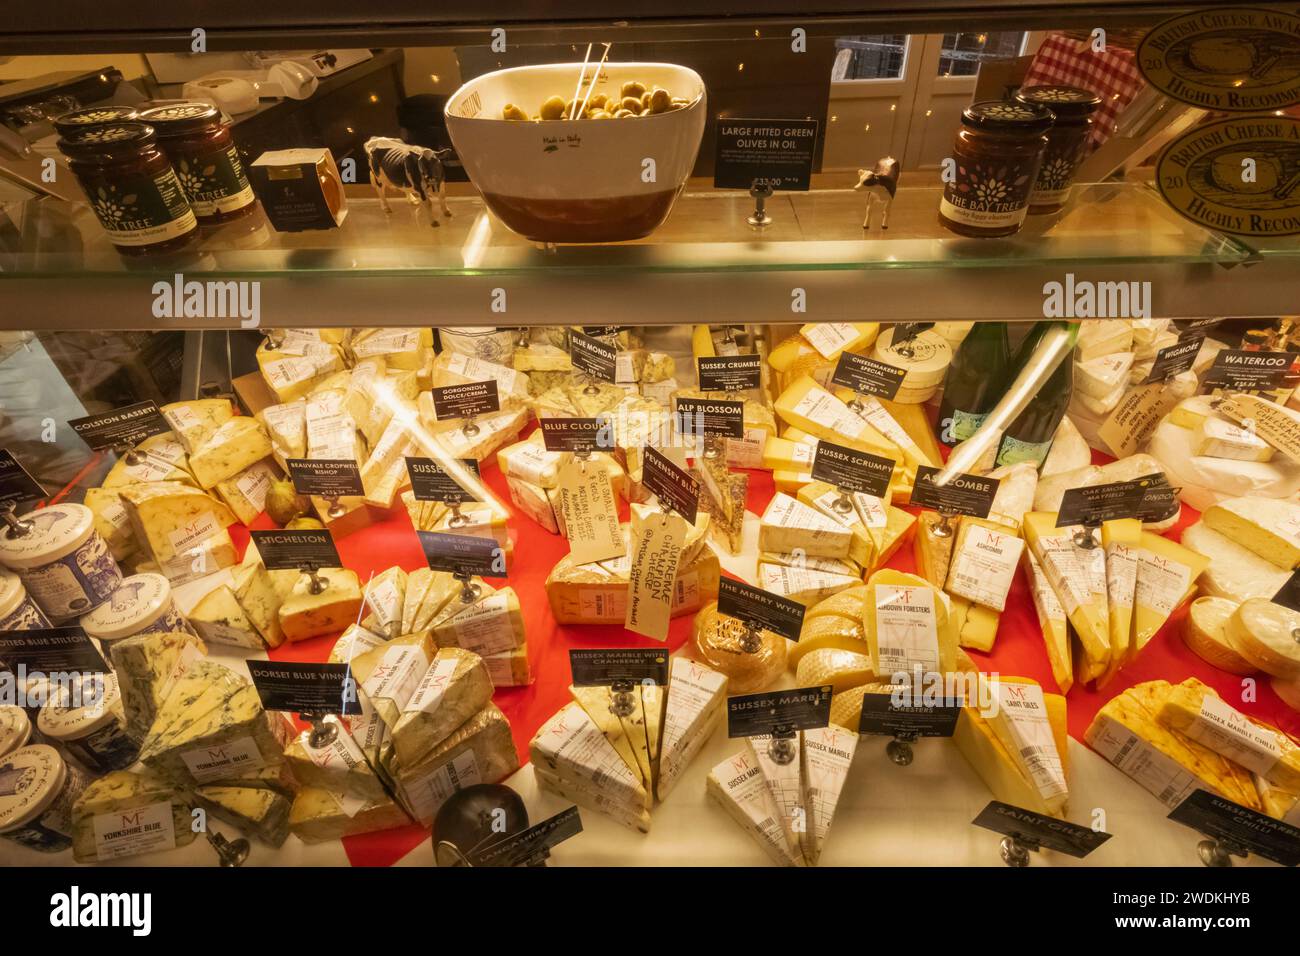 Angleterre, Sussex, East Sussex, Lewes, West Firle Middle Farm Shopping Outlet, exposition de fromages Banque D'Images